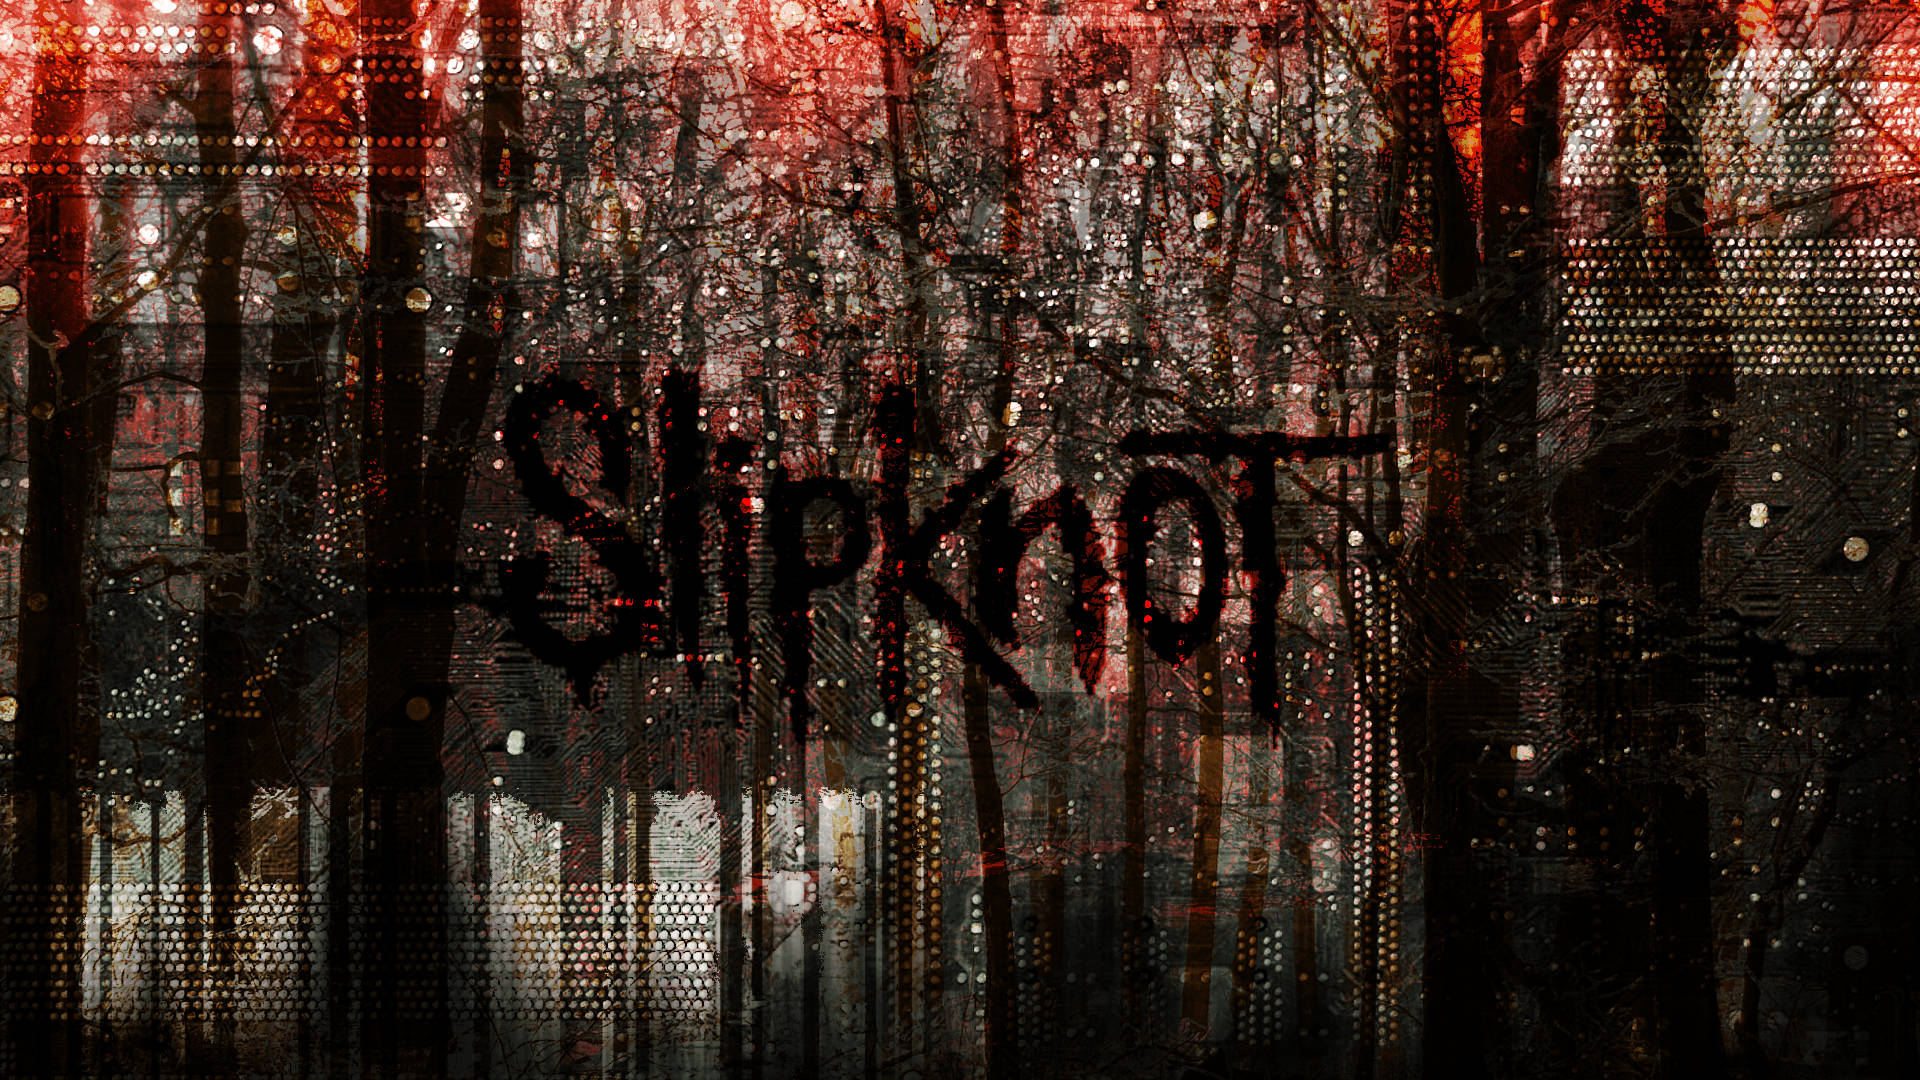 Slipknot Band Name With Blood Background